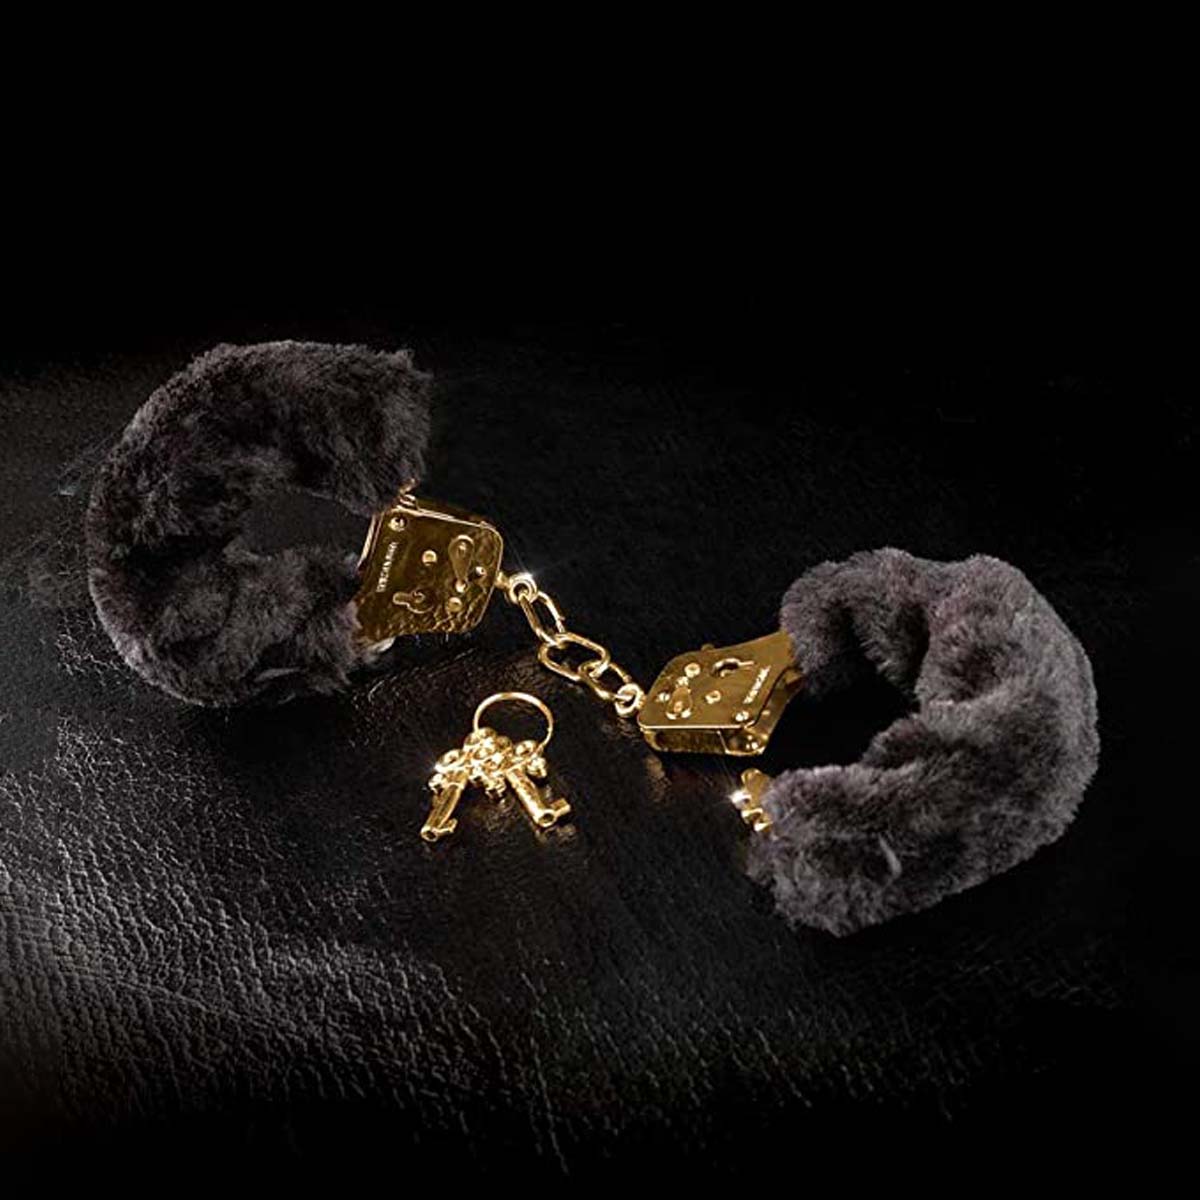 Black fluffy handcuffs with gold metal details and two gold metal keys over a black textured background Nudie Co